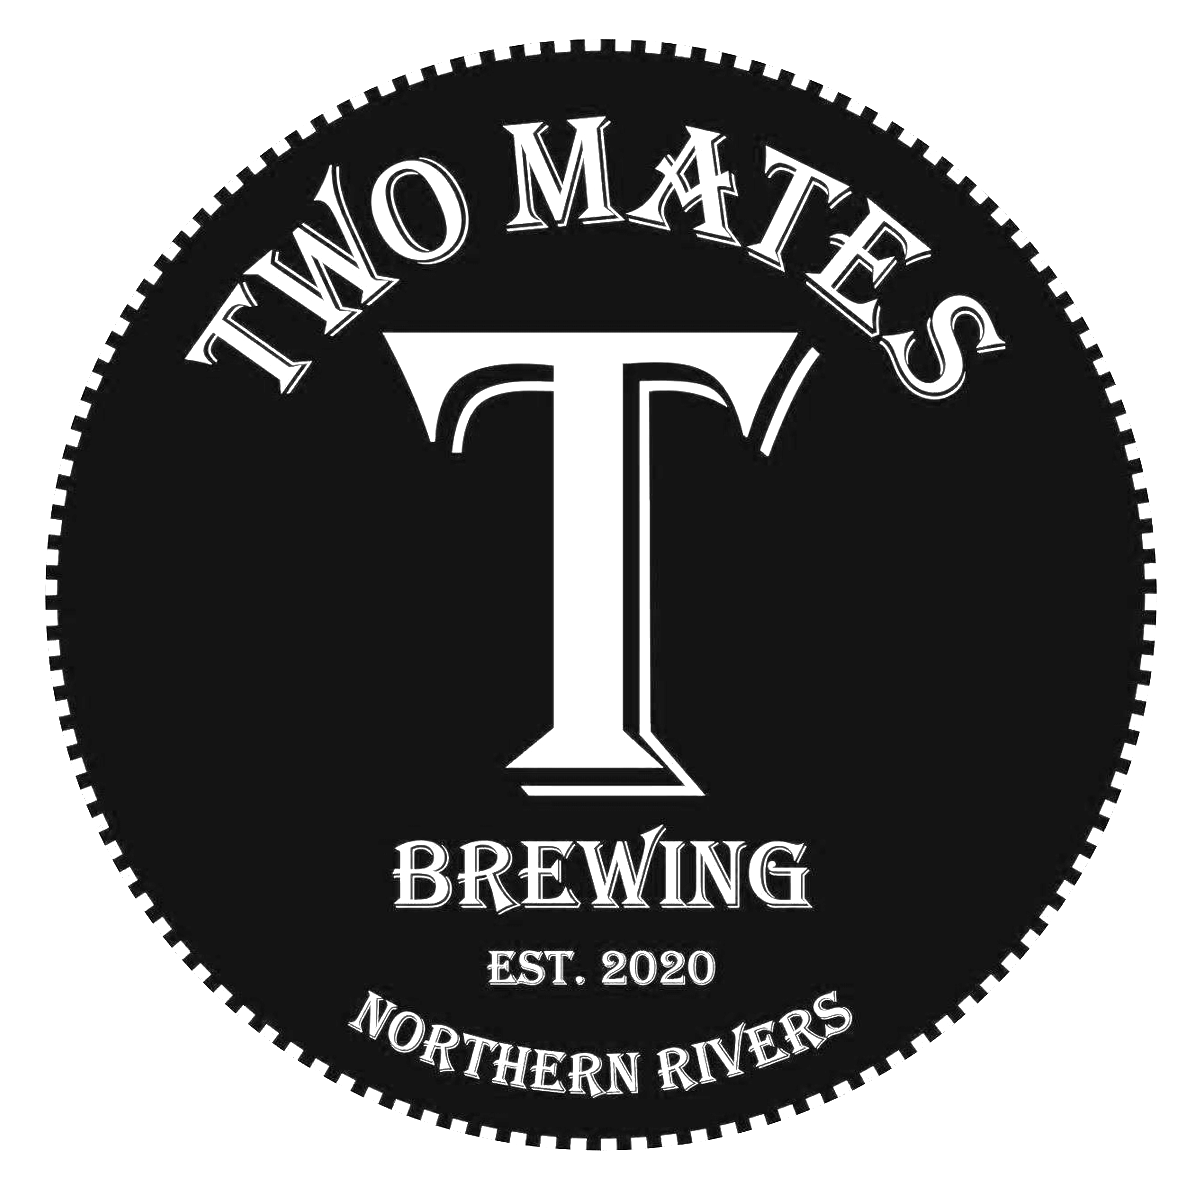 Two Mates Brewing